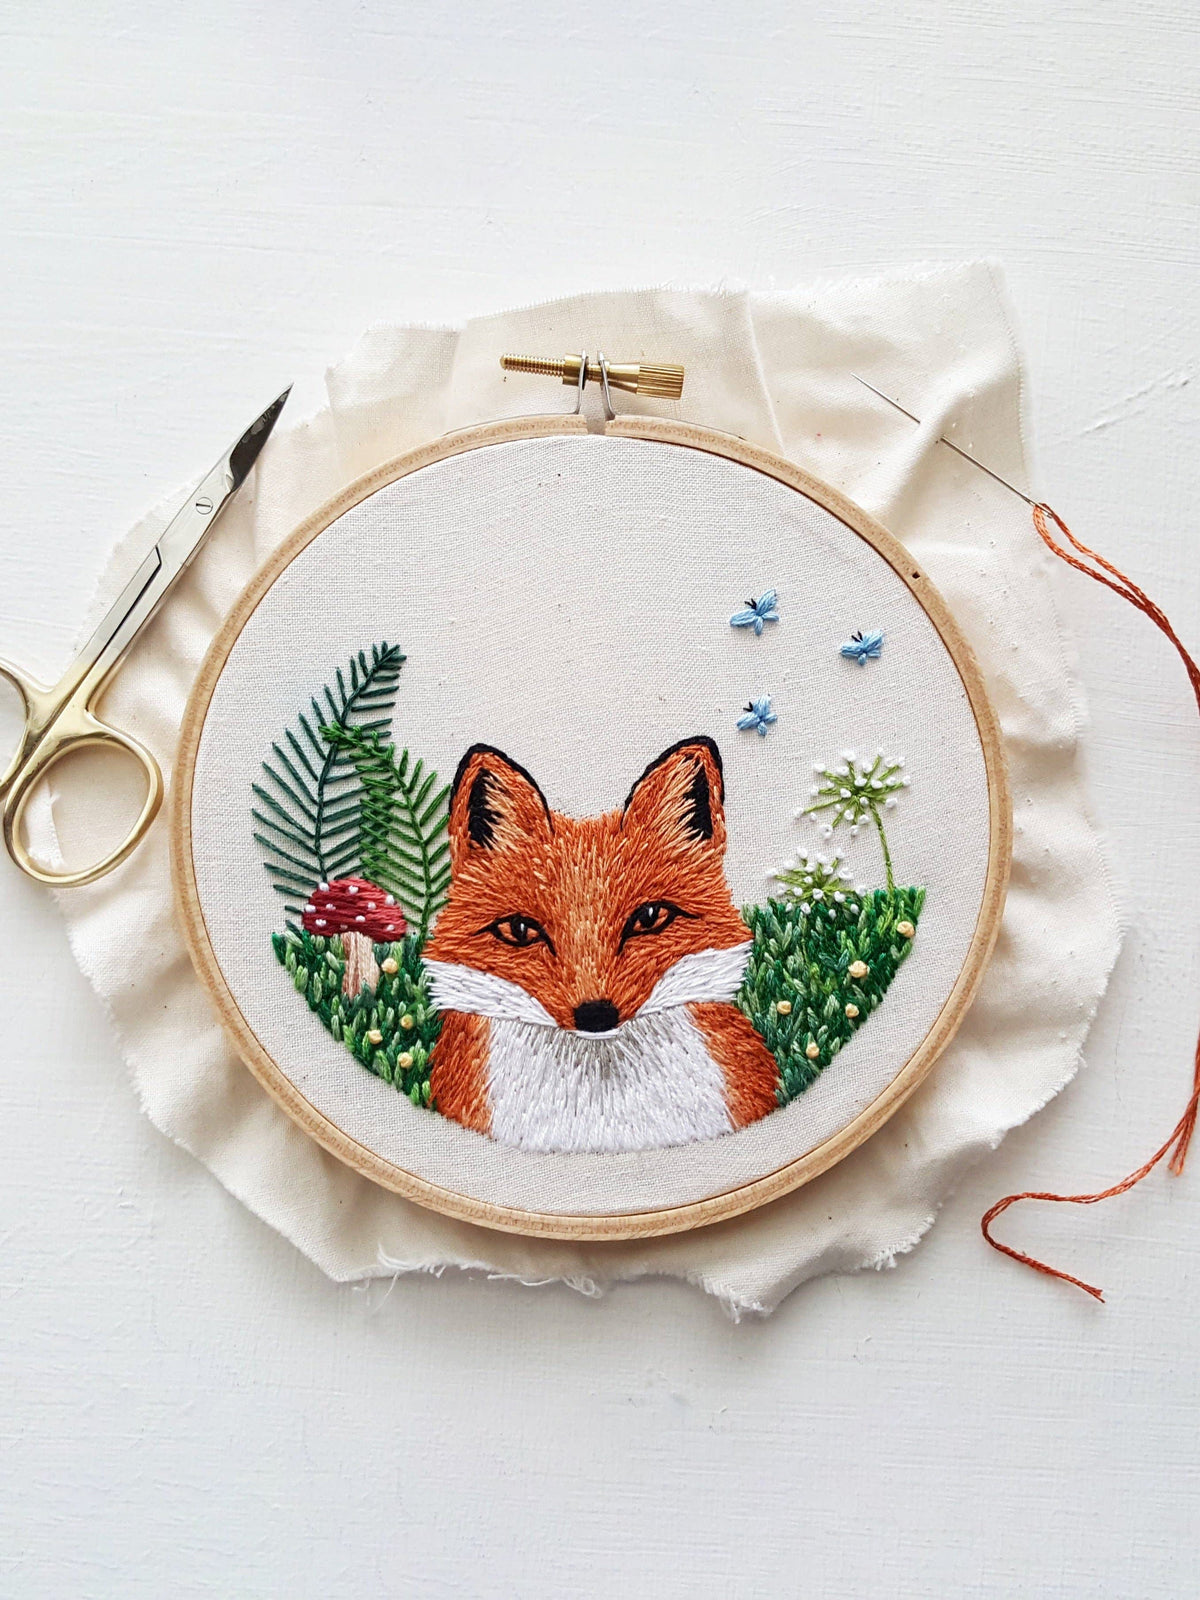 Jessica Long Embroidery Embroidery Kit Red Fox Embroidery Kit